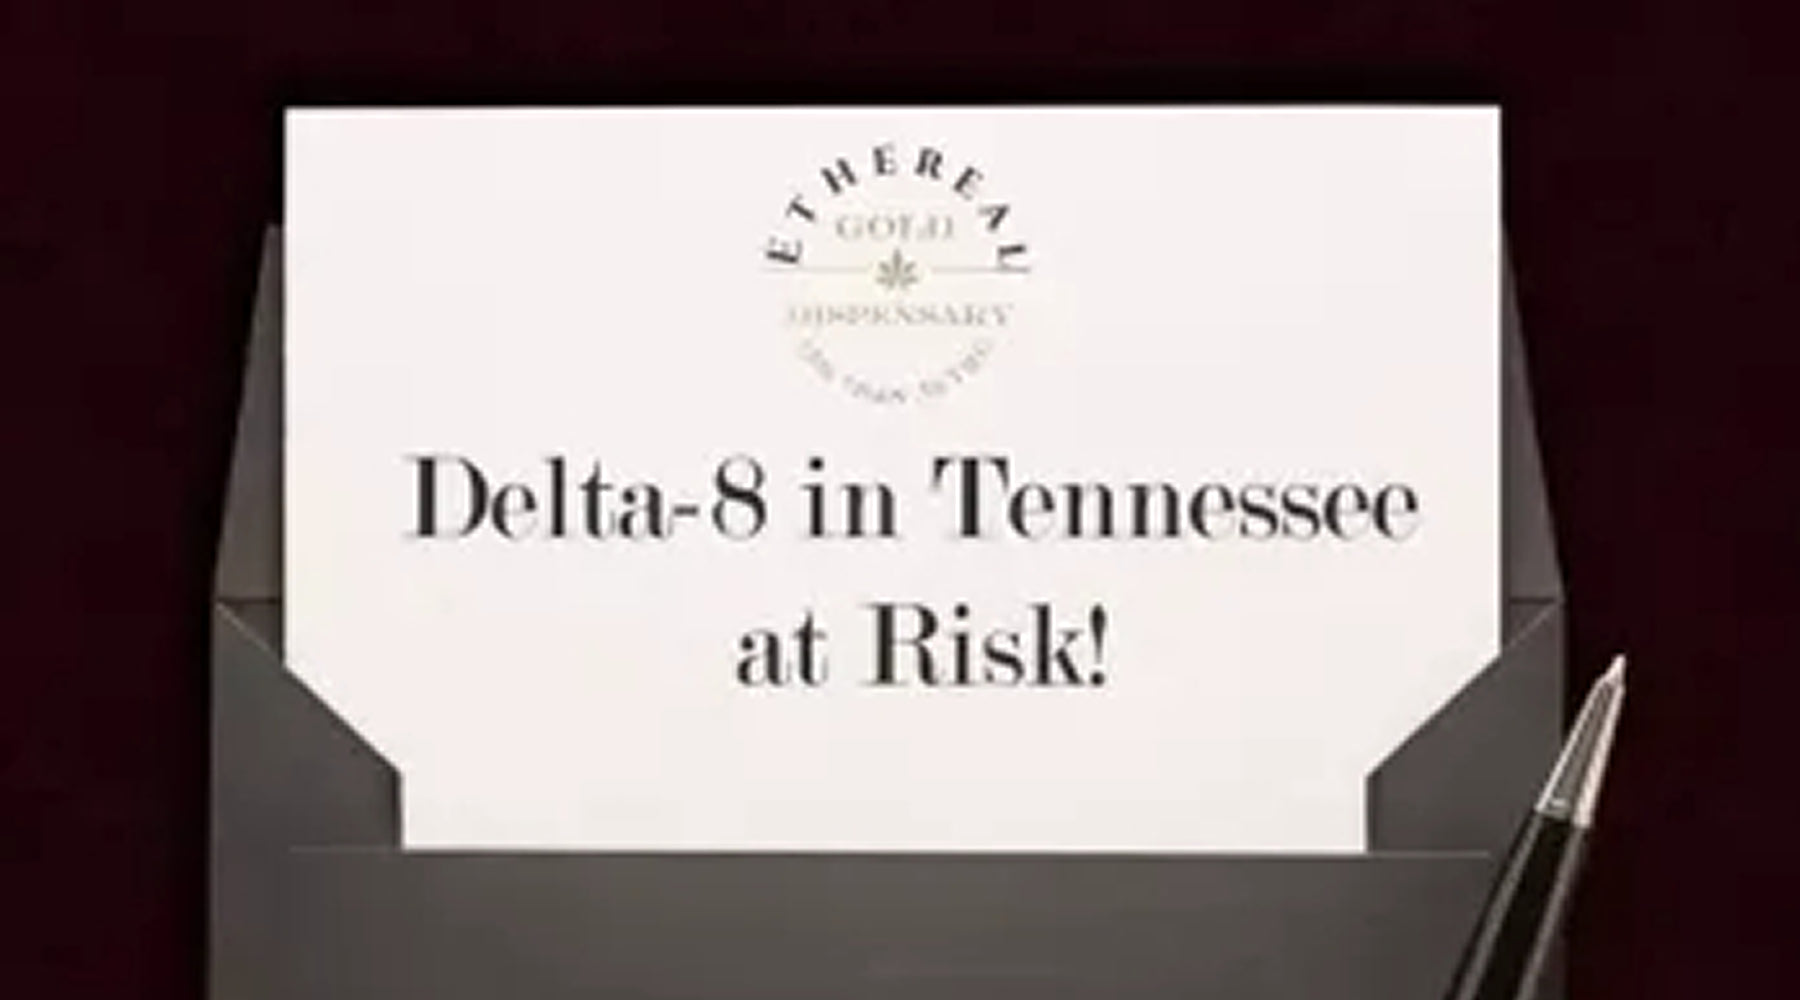 Delta-8 in Tennessee At Risk 